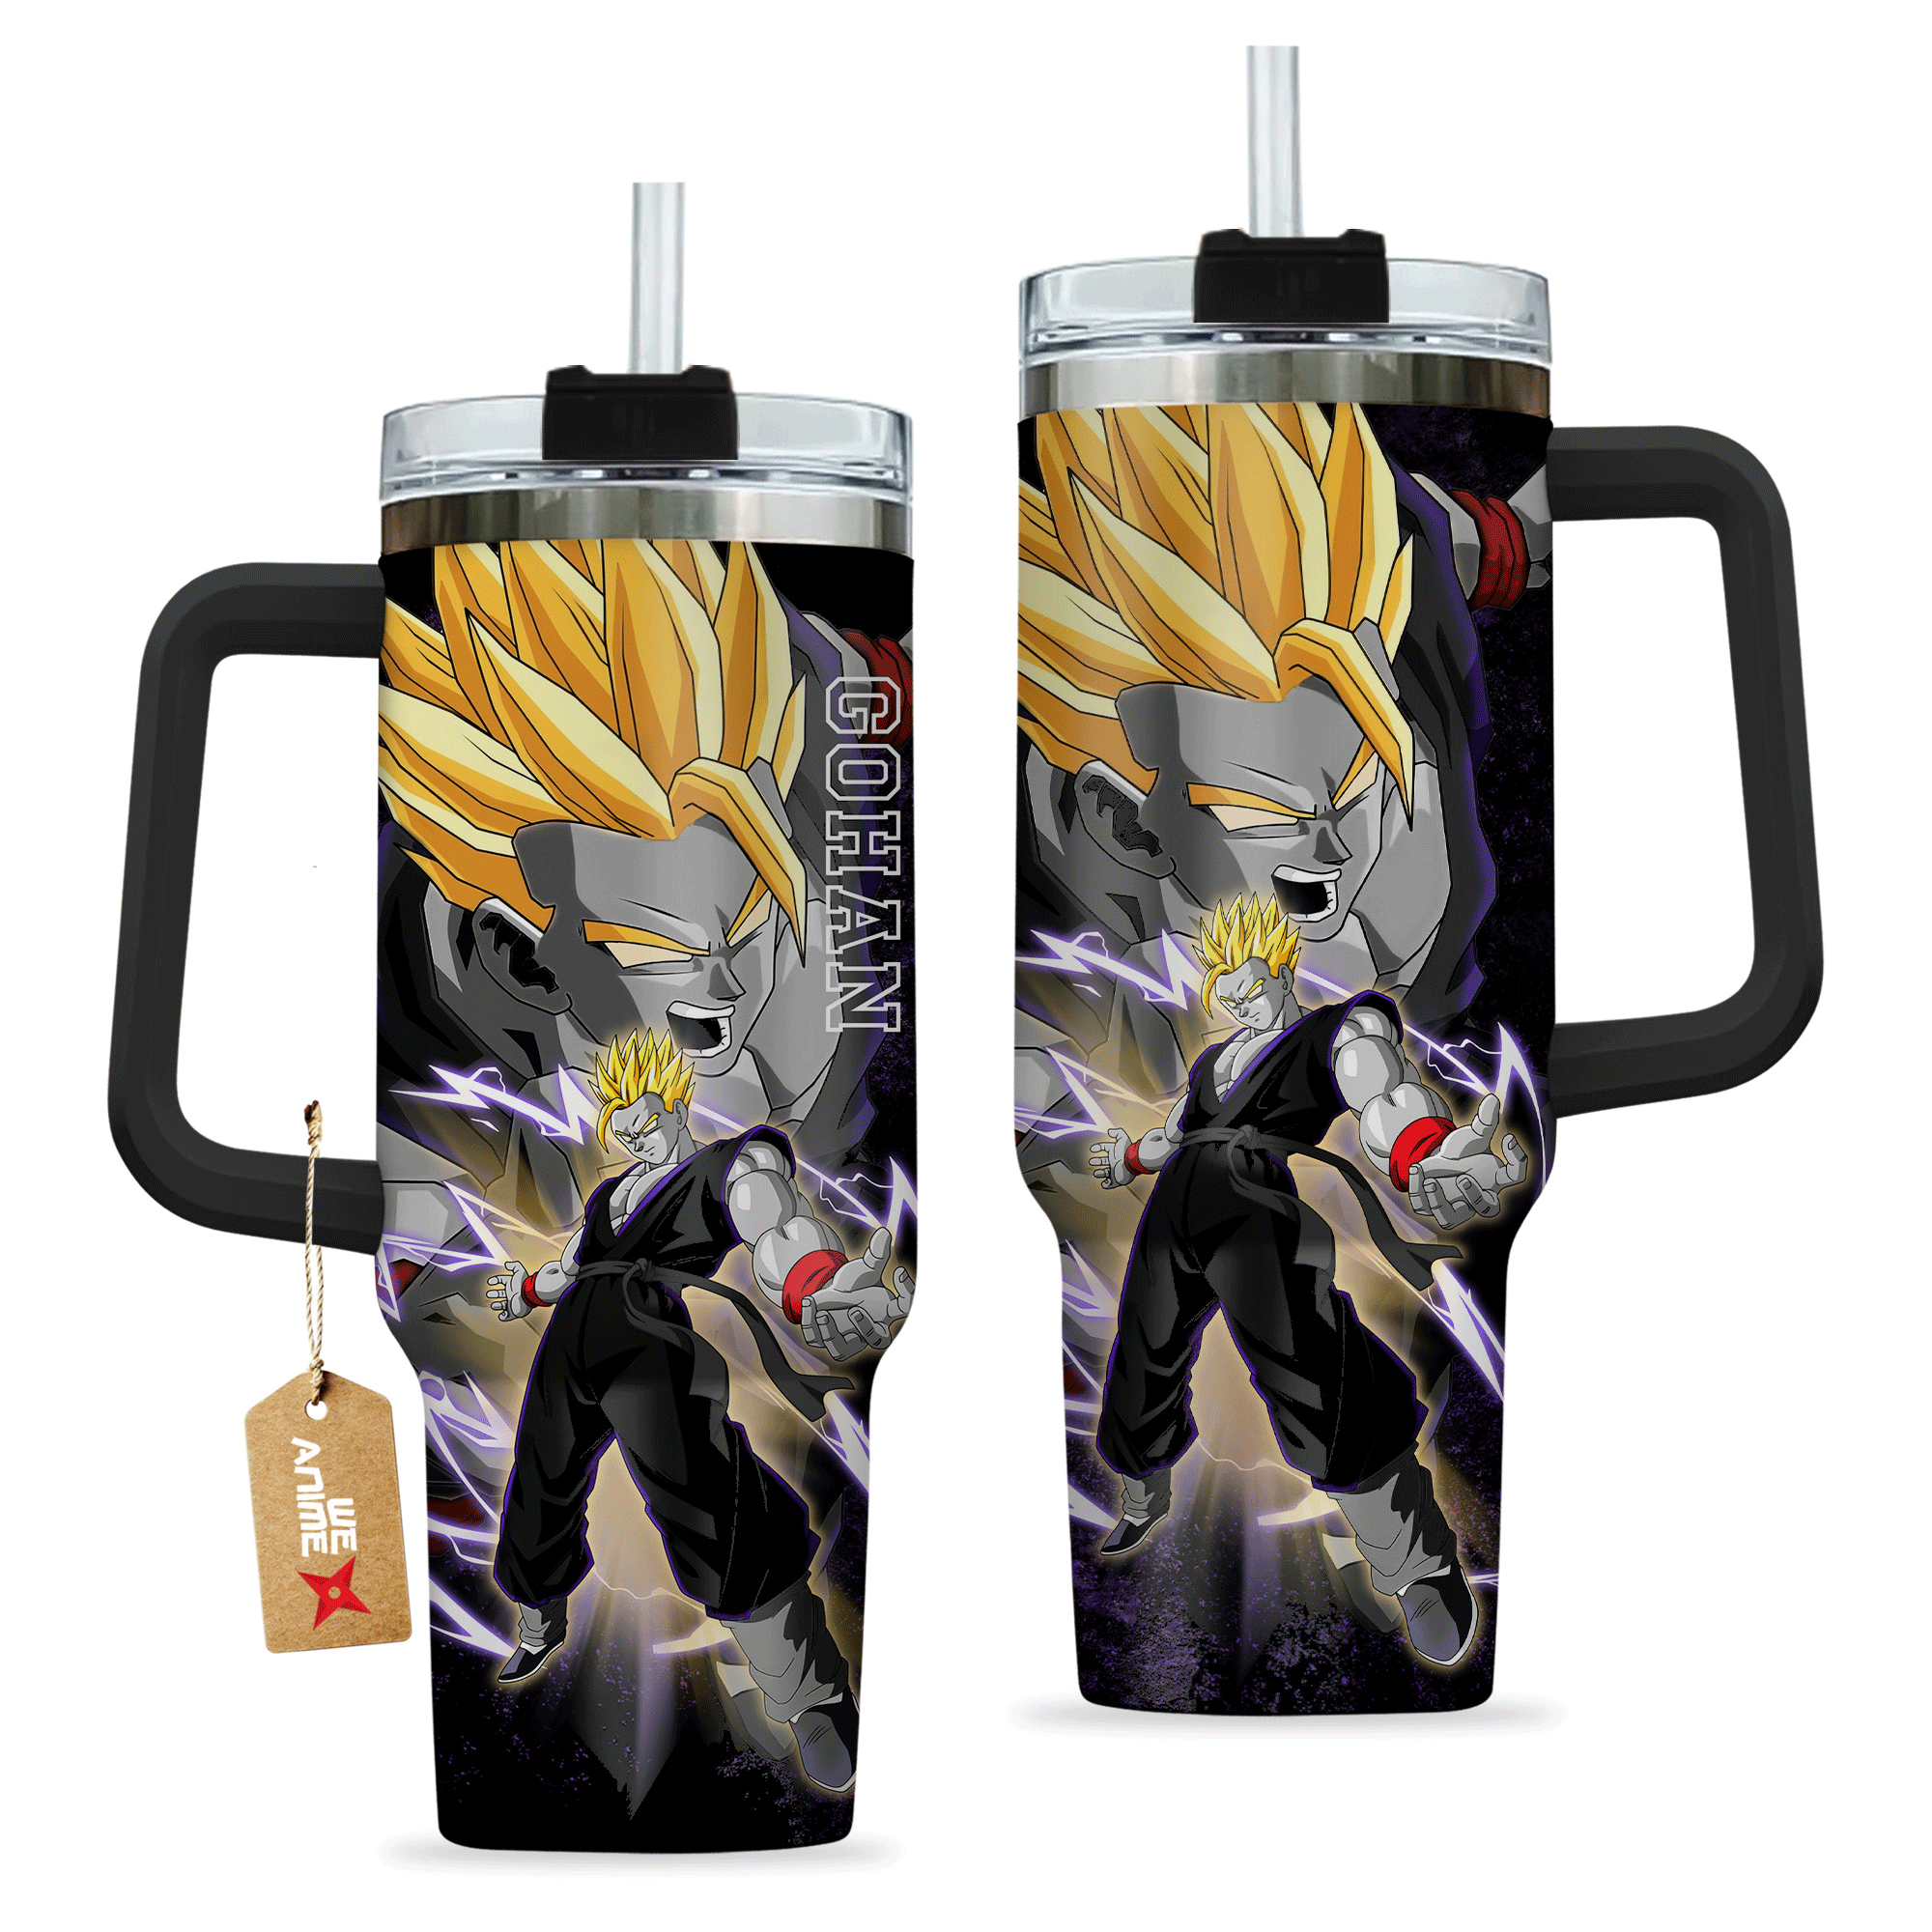 Gohan Adult Super Saiyan 2 40oz Tumbler Cup Personalized Anime Accessories - Wexanime